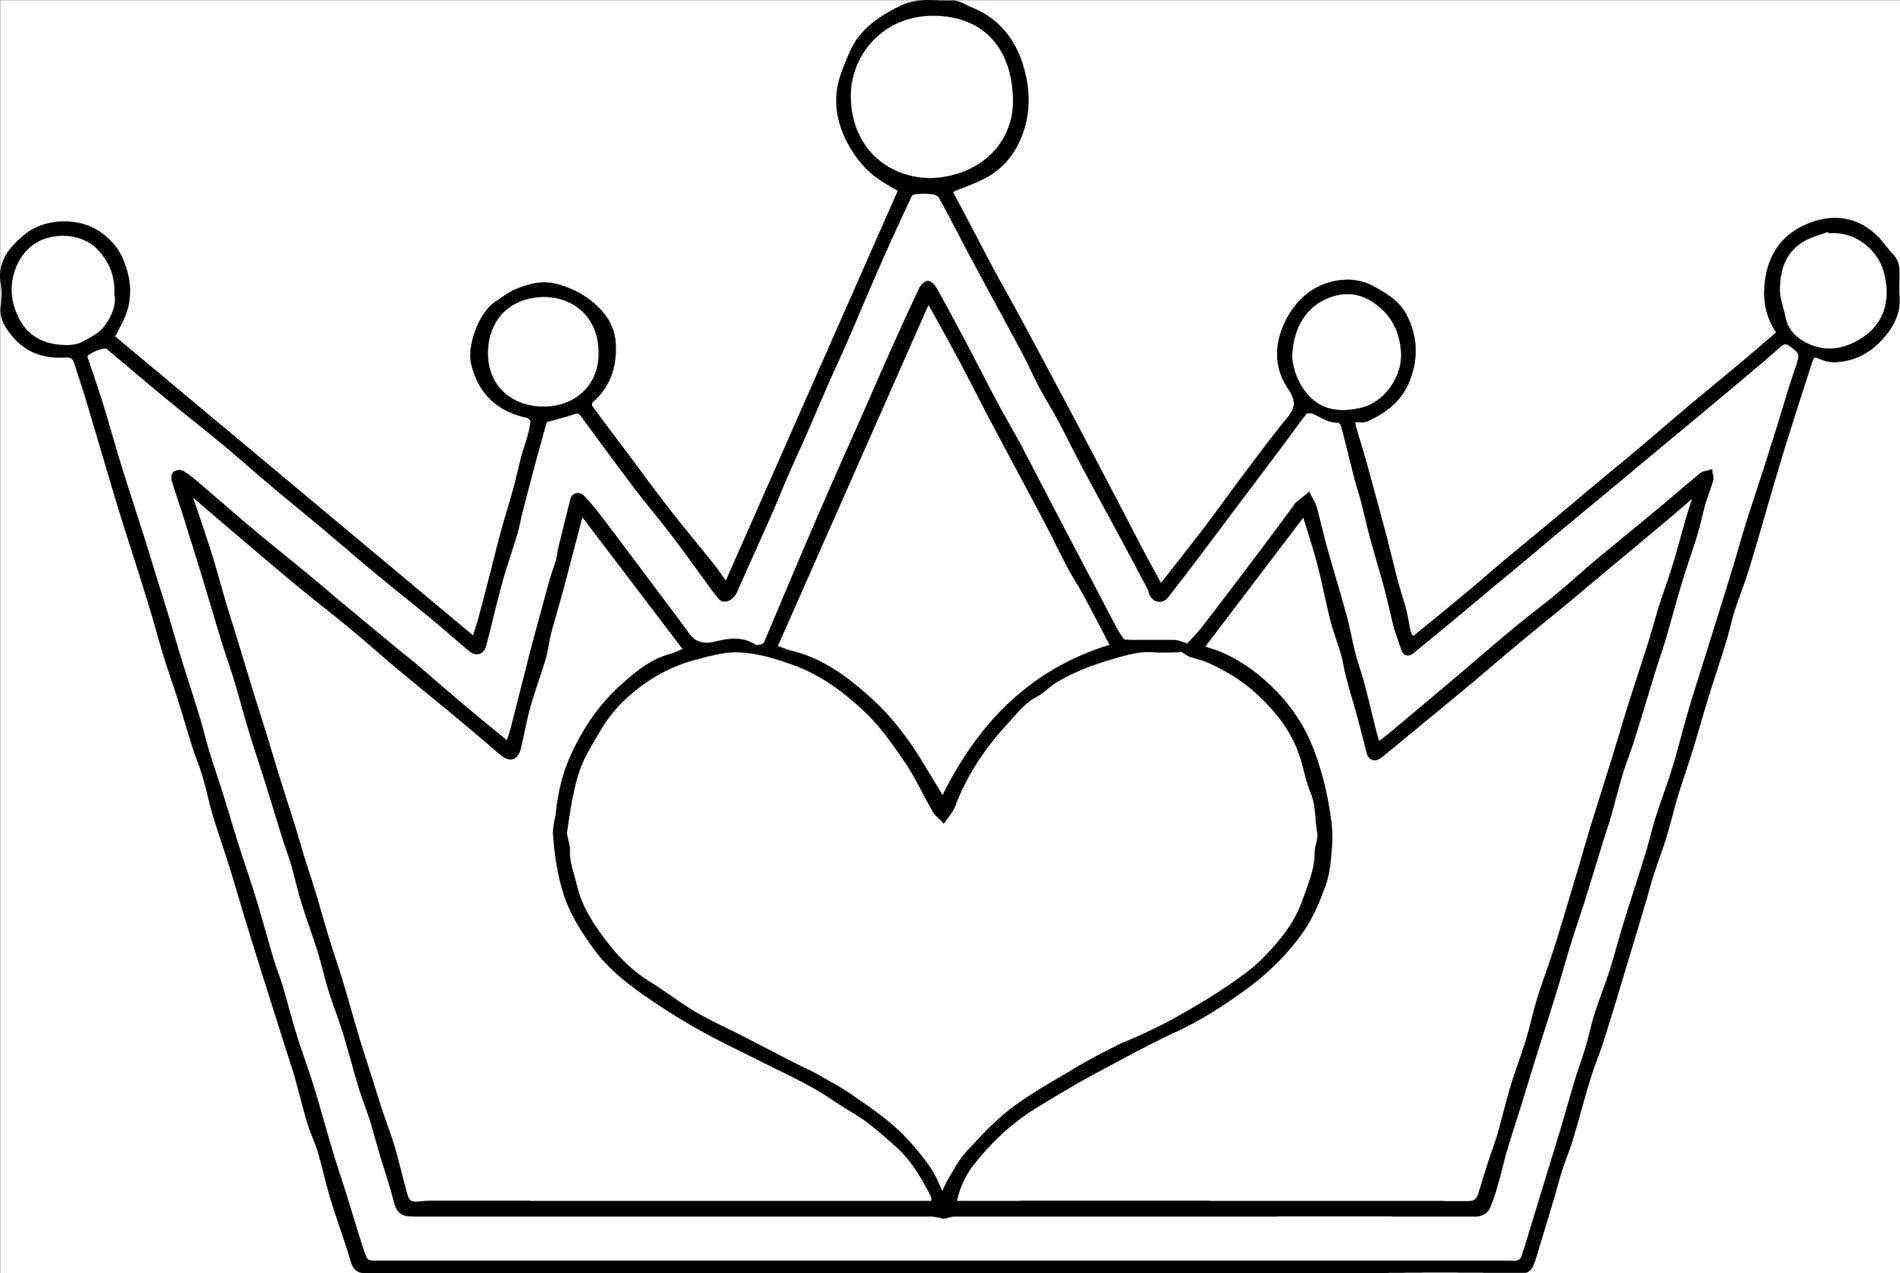 Crown Coloring Pages For Boys
 Princess Crown Coloring Page – Through the thousands of